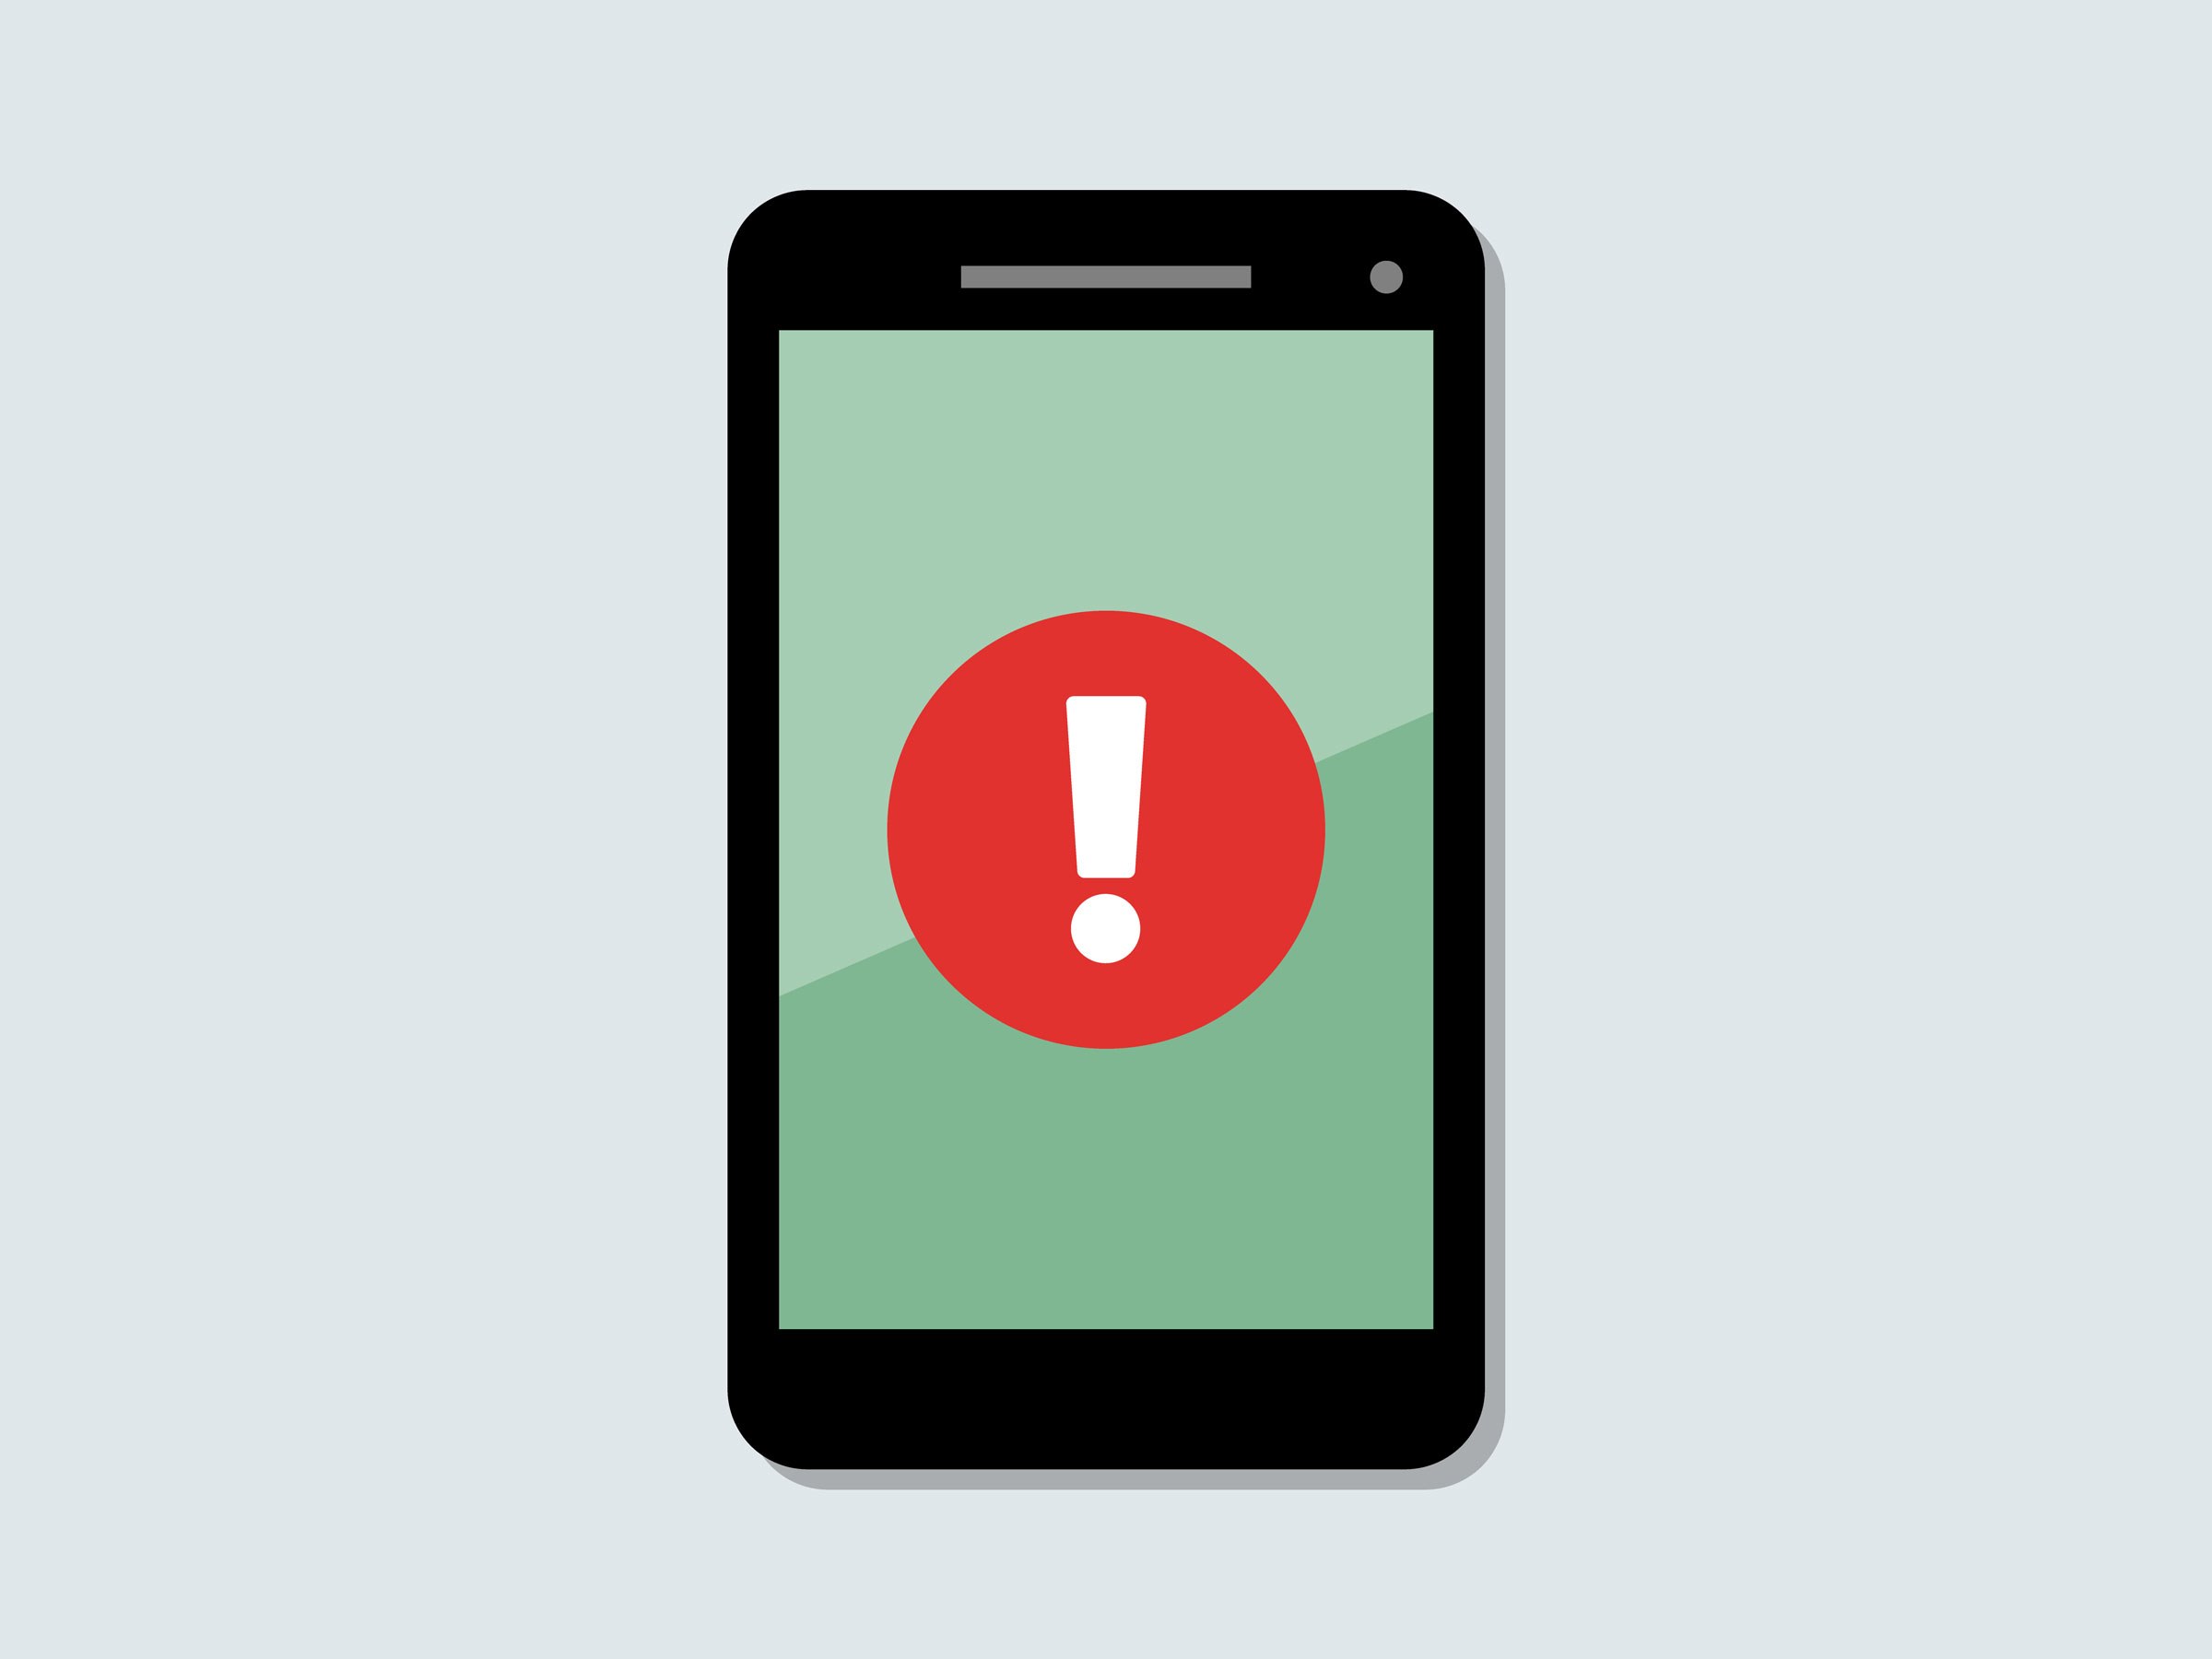 Pop-Up Mobile Ads Surge as Sites Scramble to Stop Them | WIRED